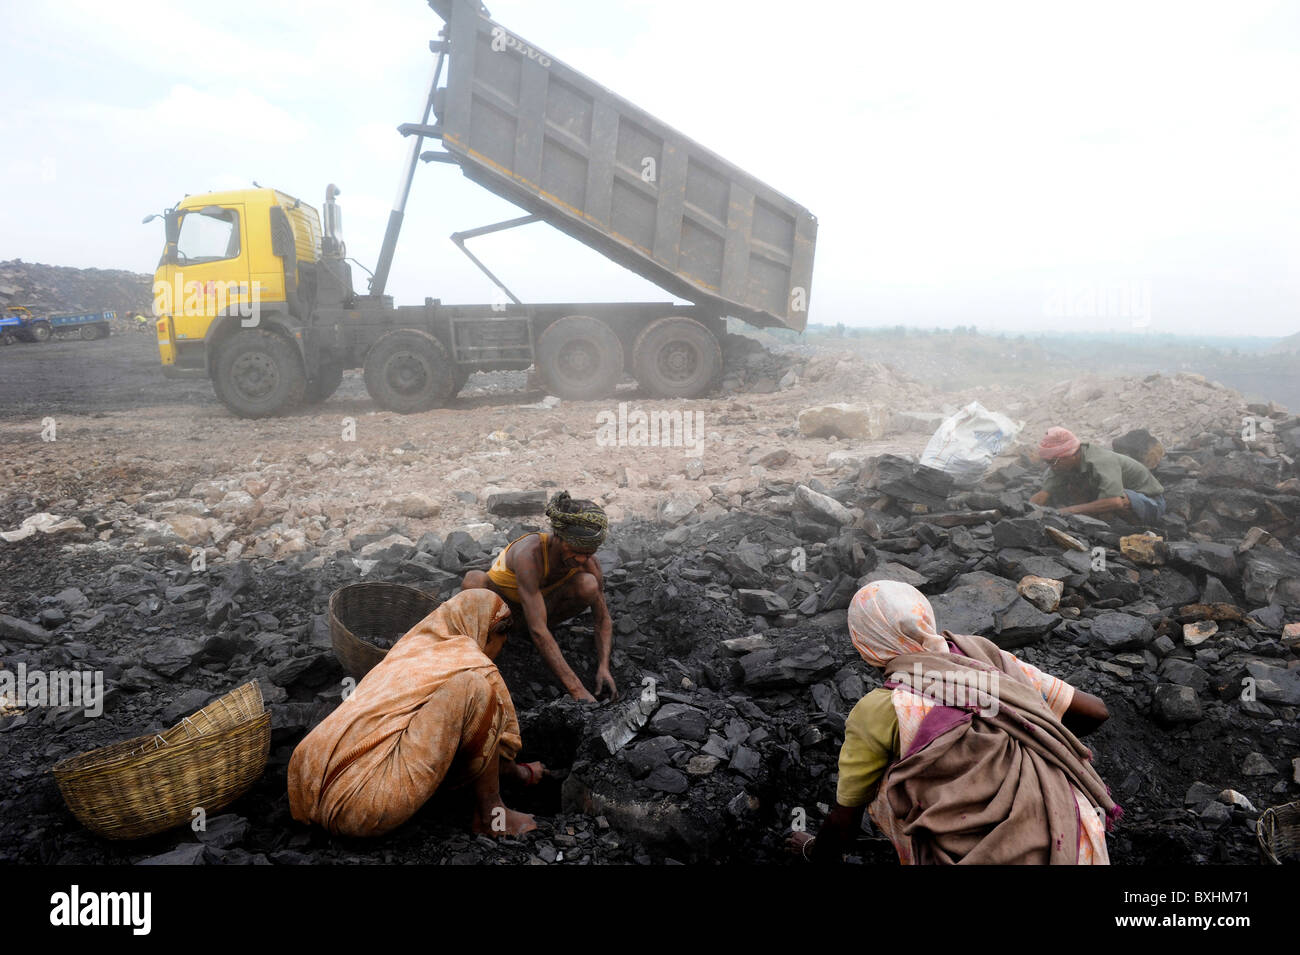 India Jharkhand Dhanbad Jharia, people pick coal at overburden dumping site of opencast mine of Bharat coking coal Ltd., behind Volvo truck of BCCL Stock Photo